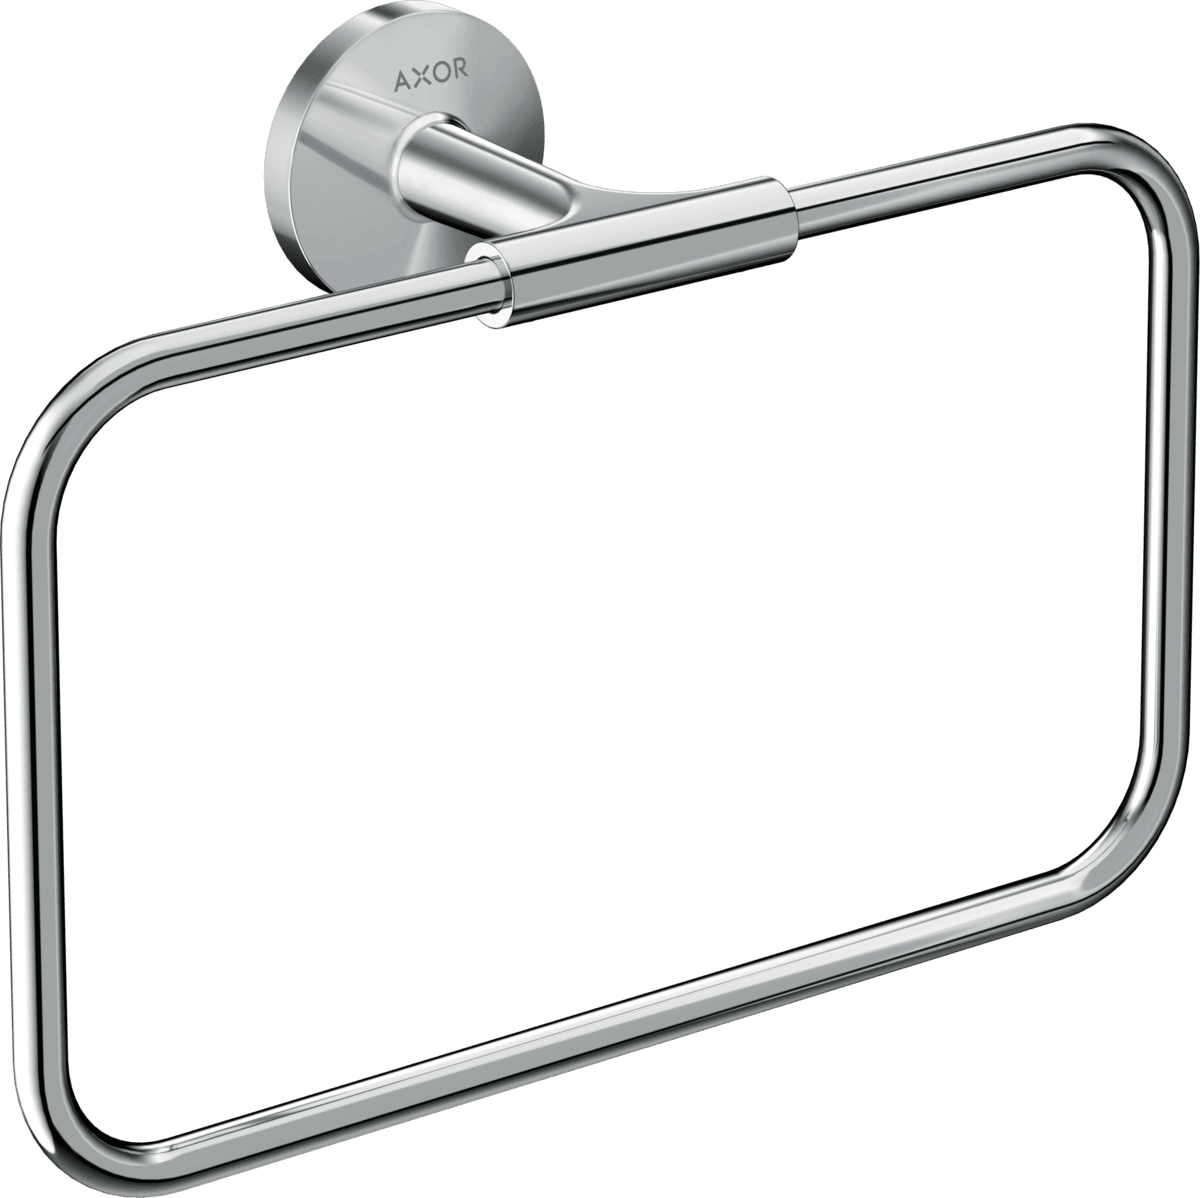 Picture of HANSGROHE AXOR Universal Circular Towel ring #42823000 - Chrome